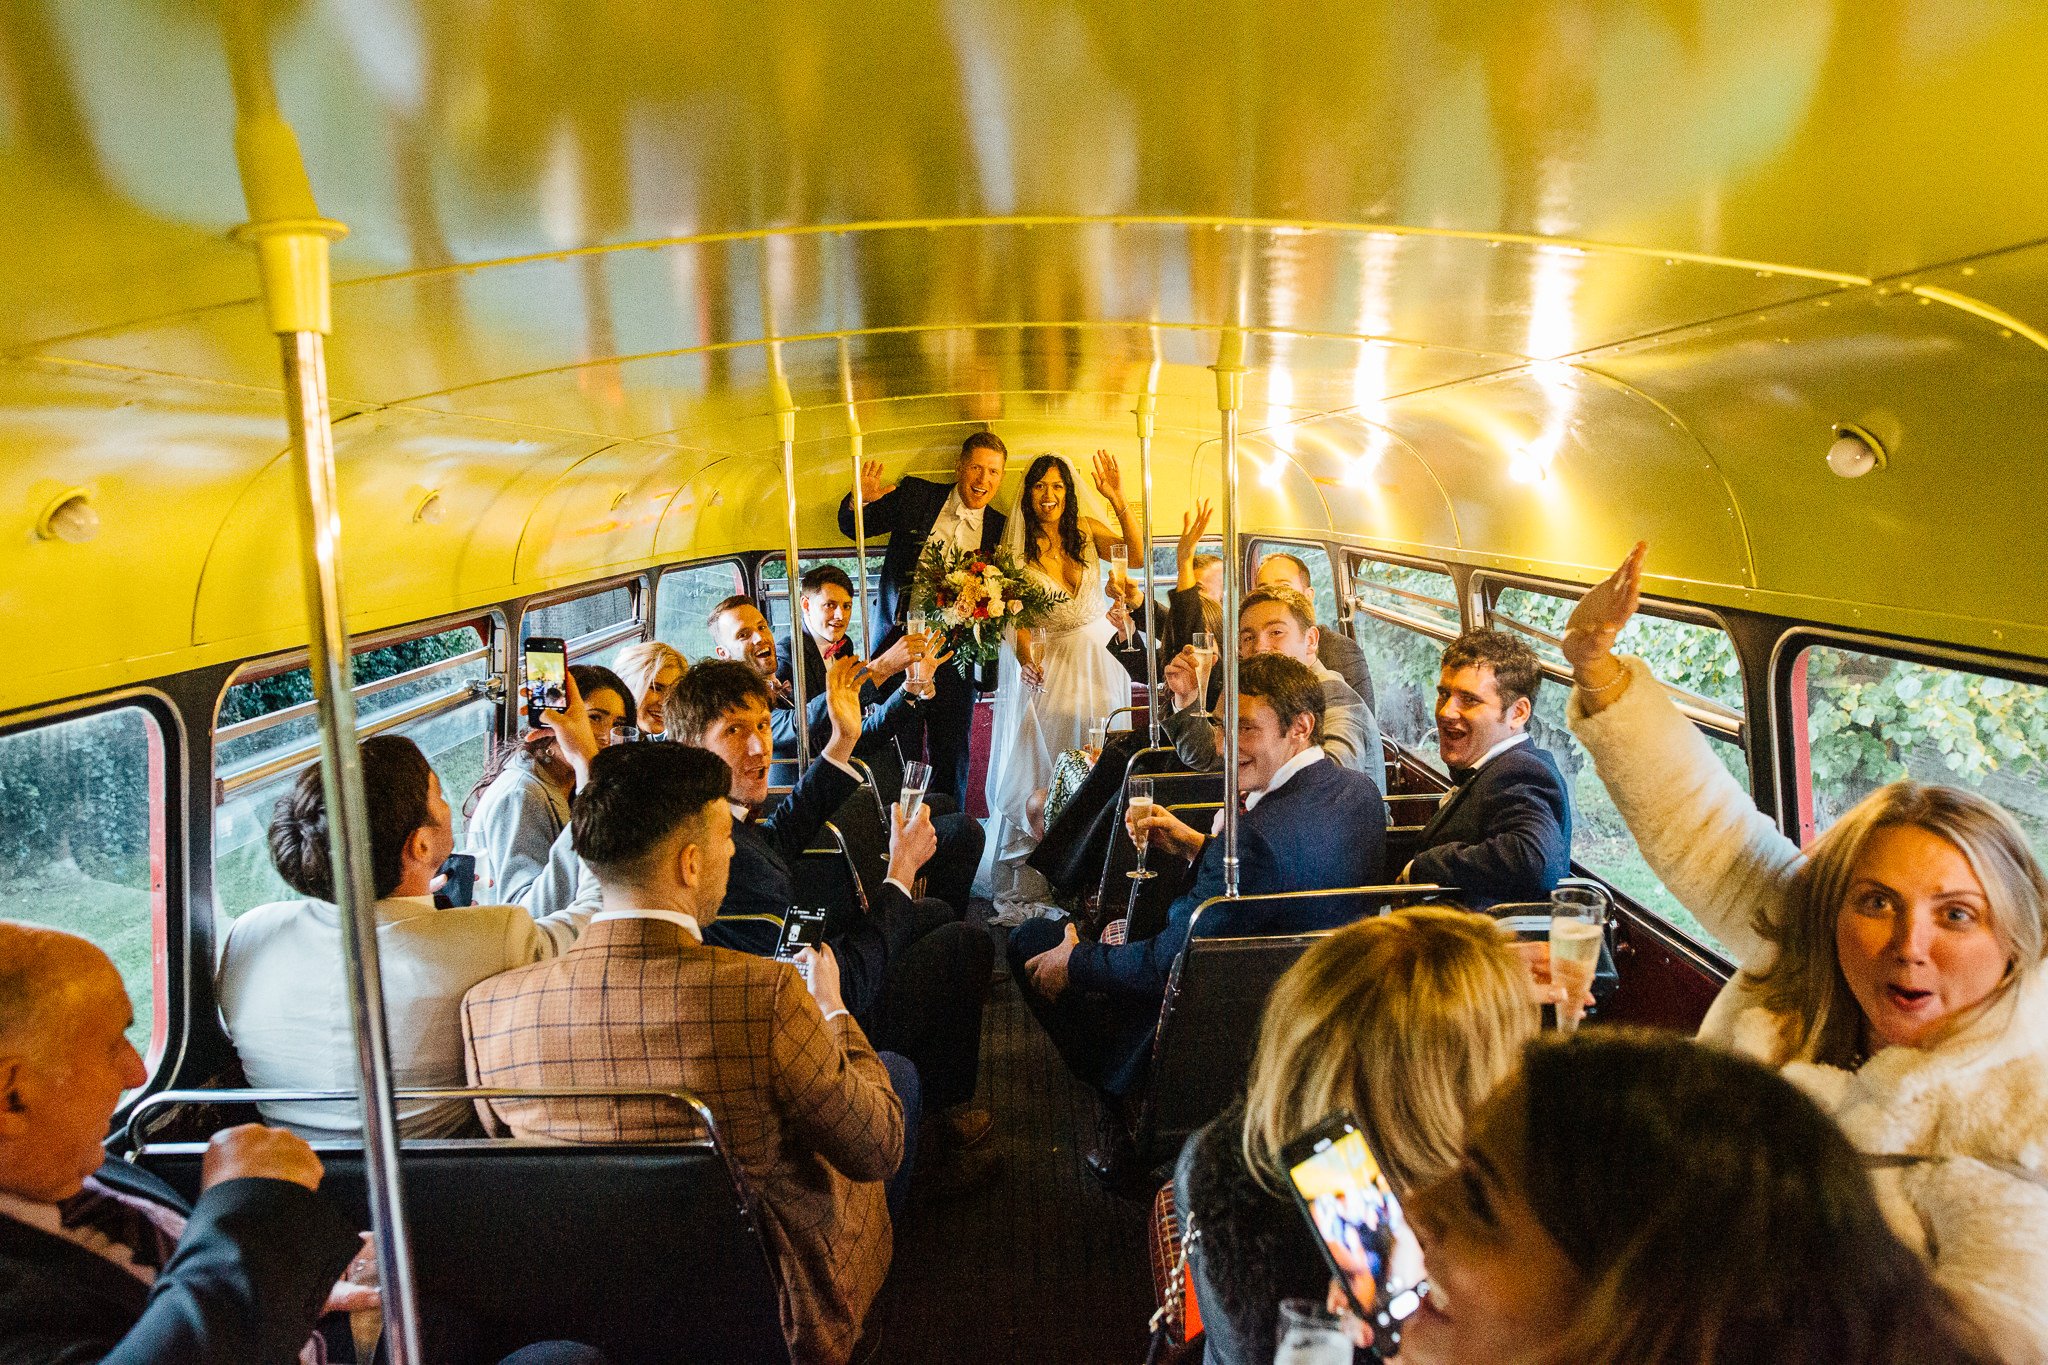  Wedding party on a bus 